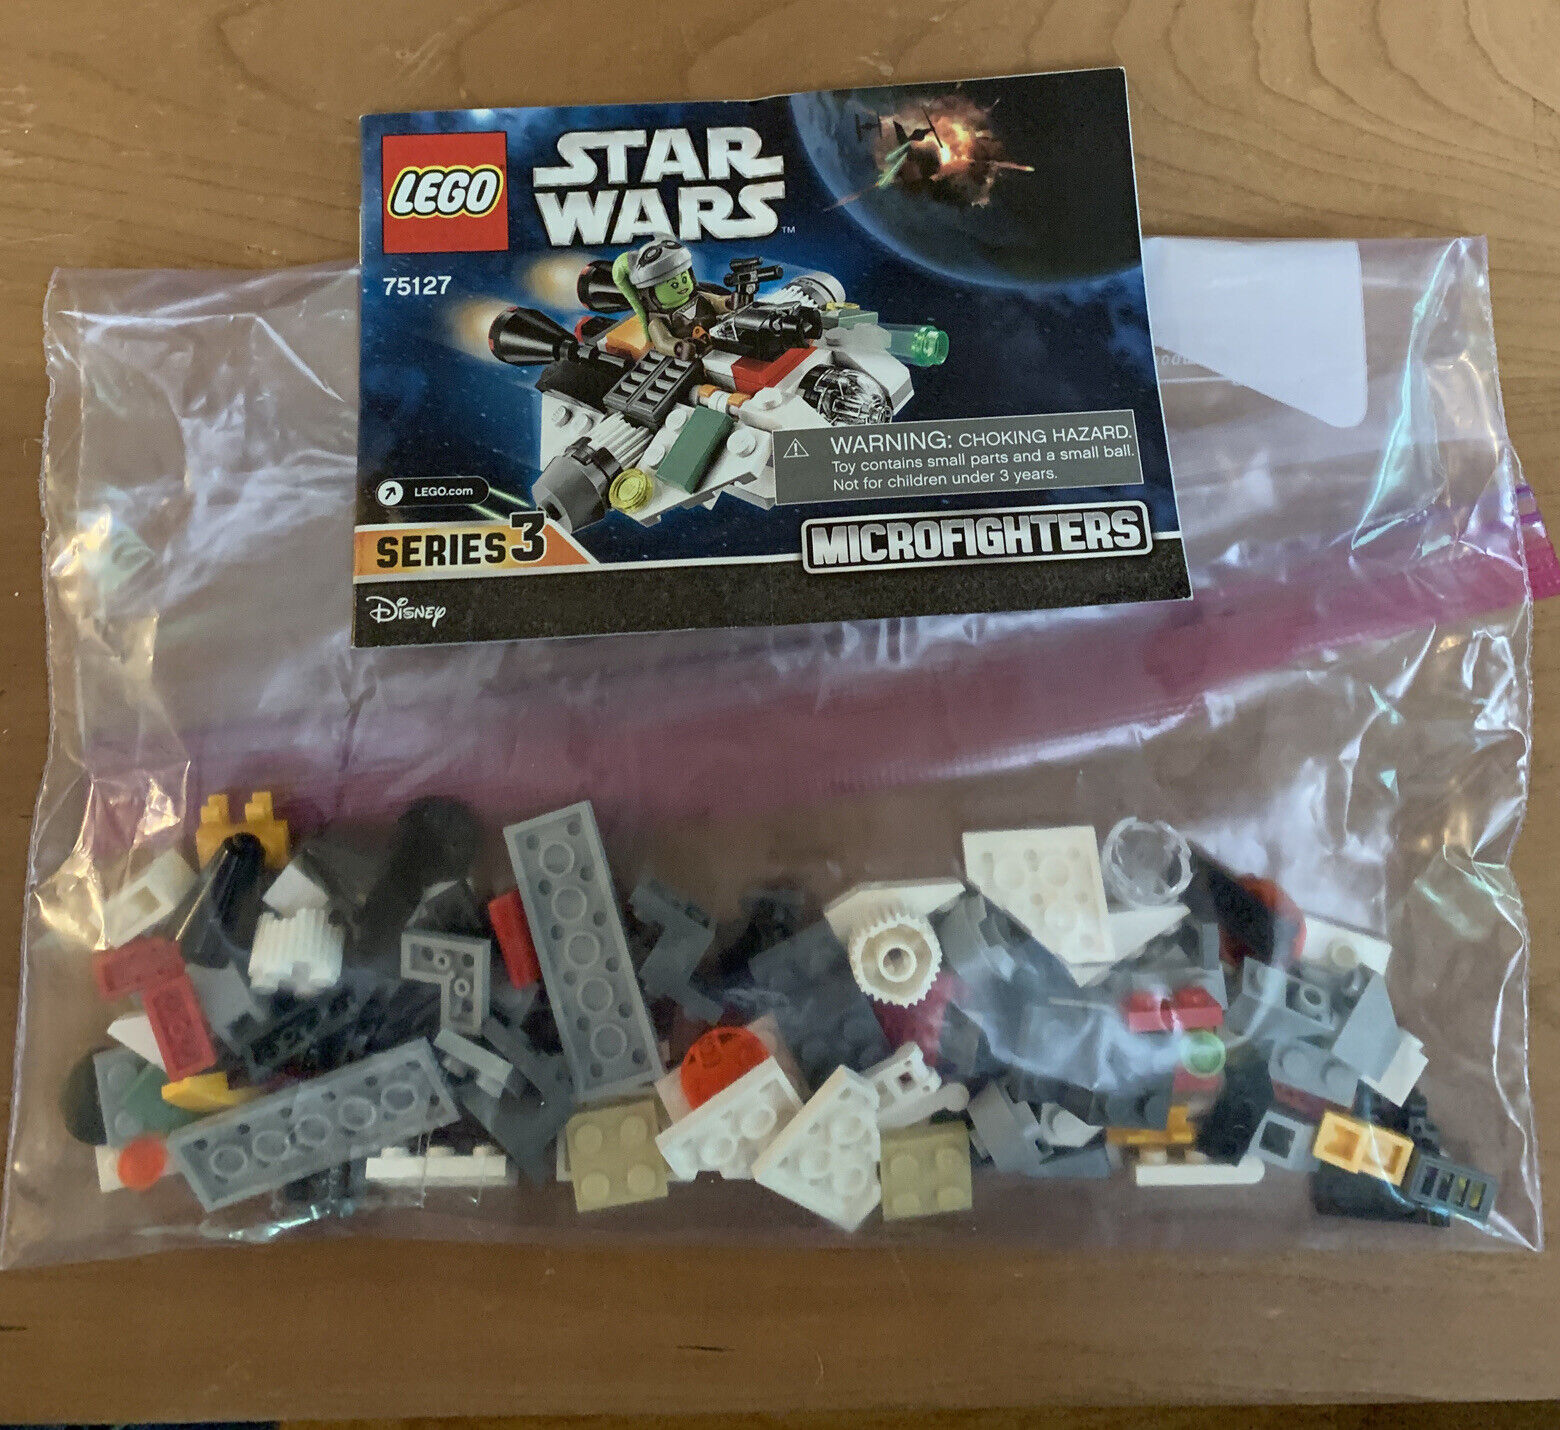 LEGO STAR WARS GHOST MICROFIGHTER 75127 RETIRED,NO MINIFIGURE